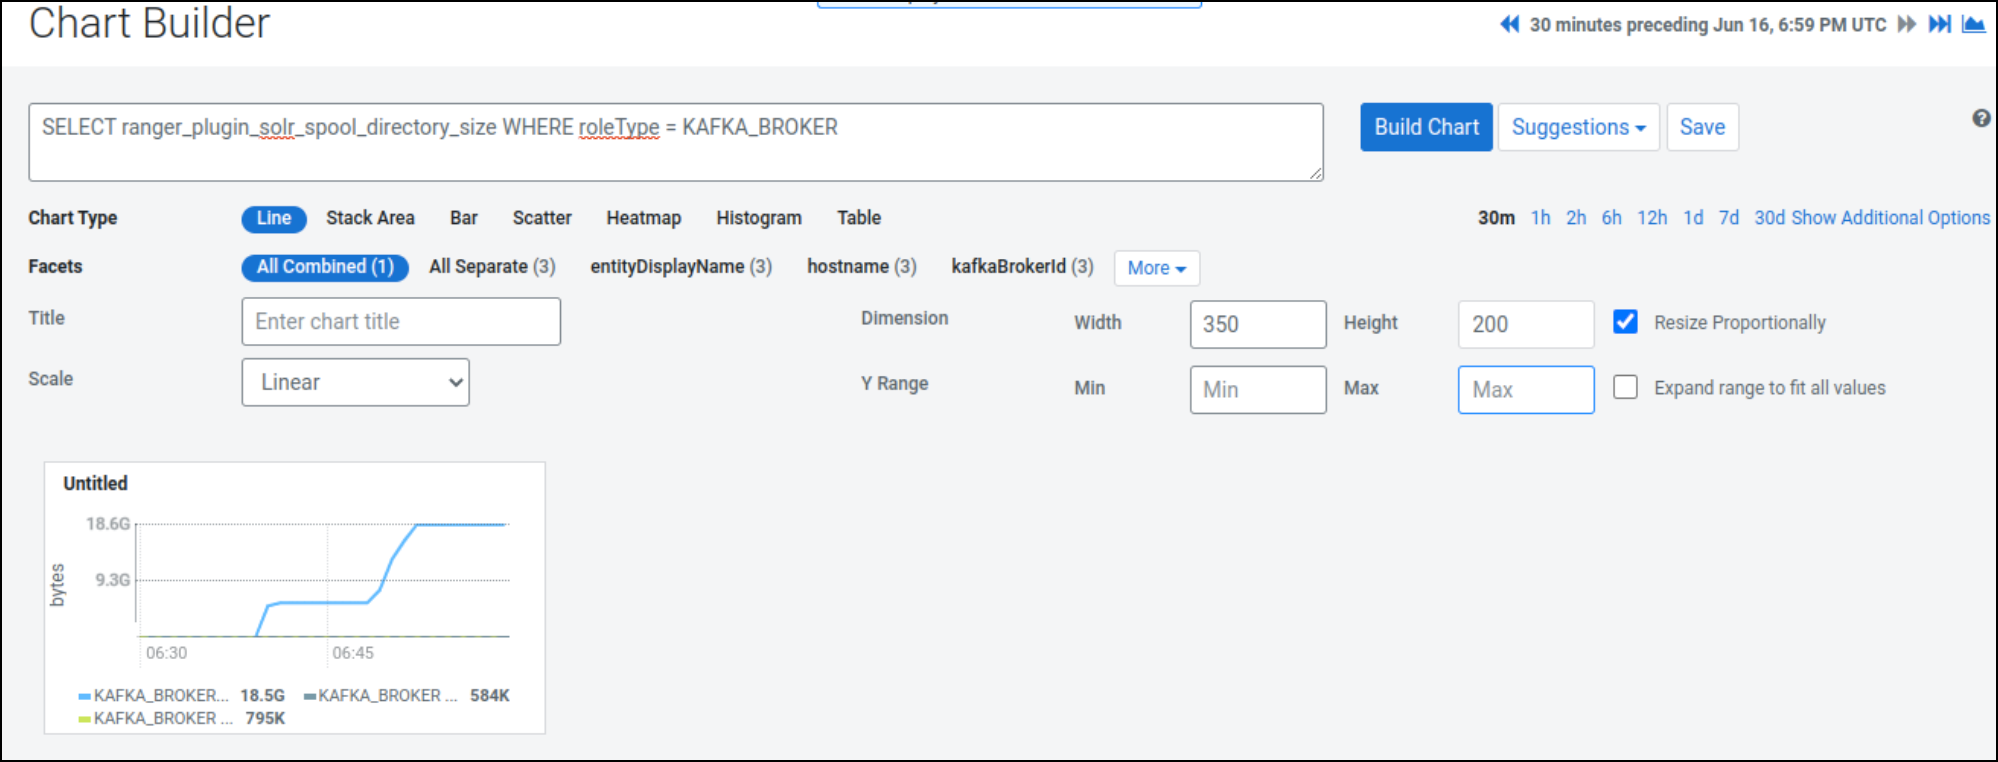 Charting the disk usage of the Ranger Solr plugin spool directory for Kafka Broker